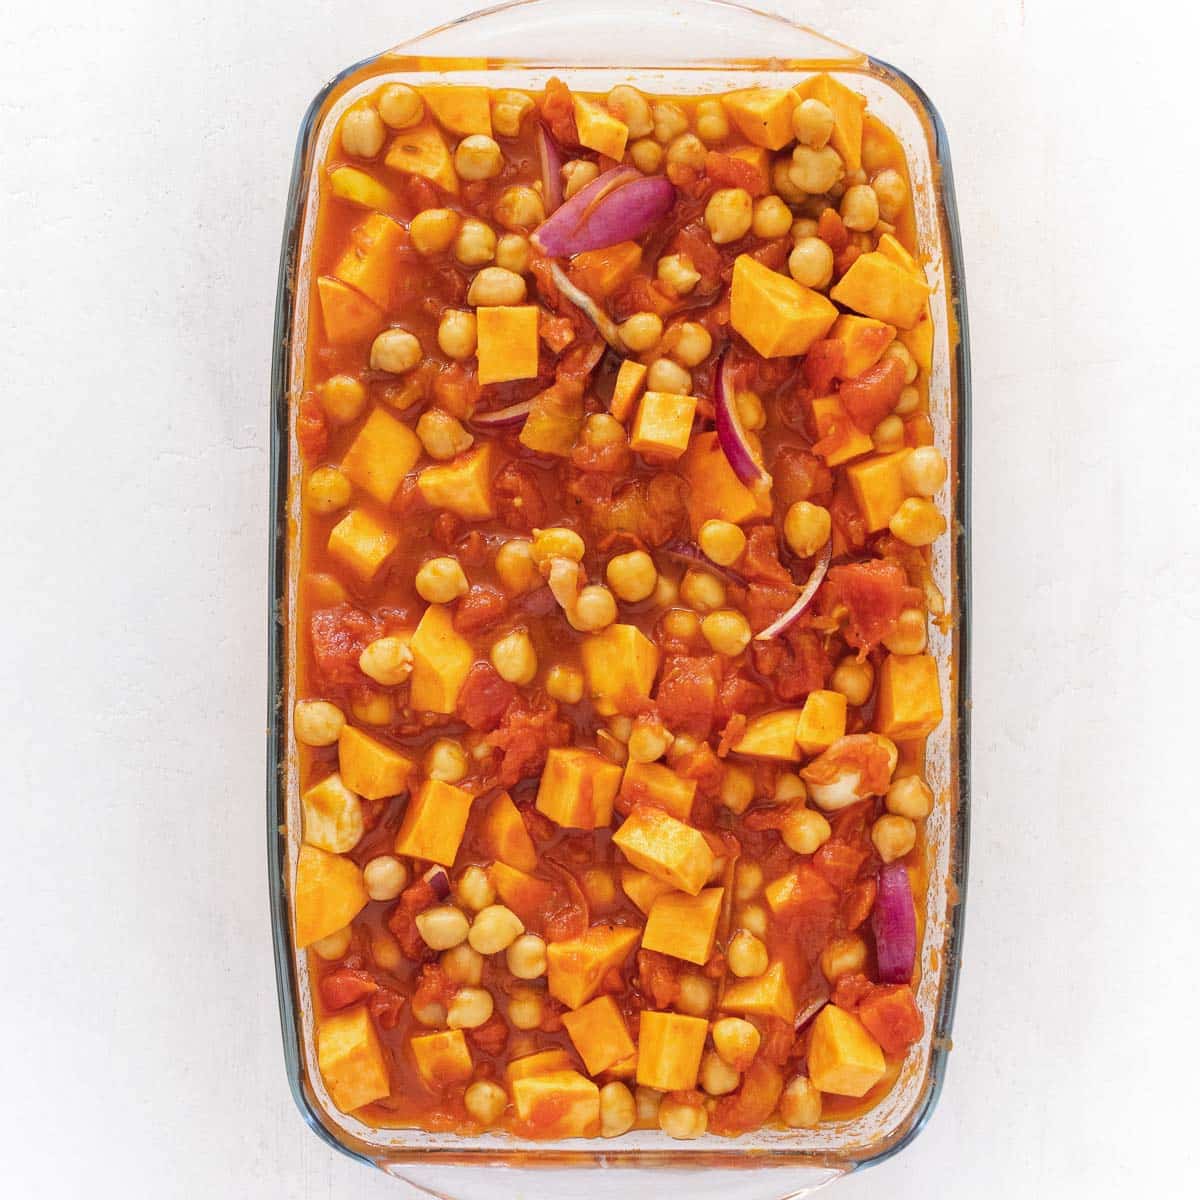 chickpea stew before baking